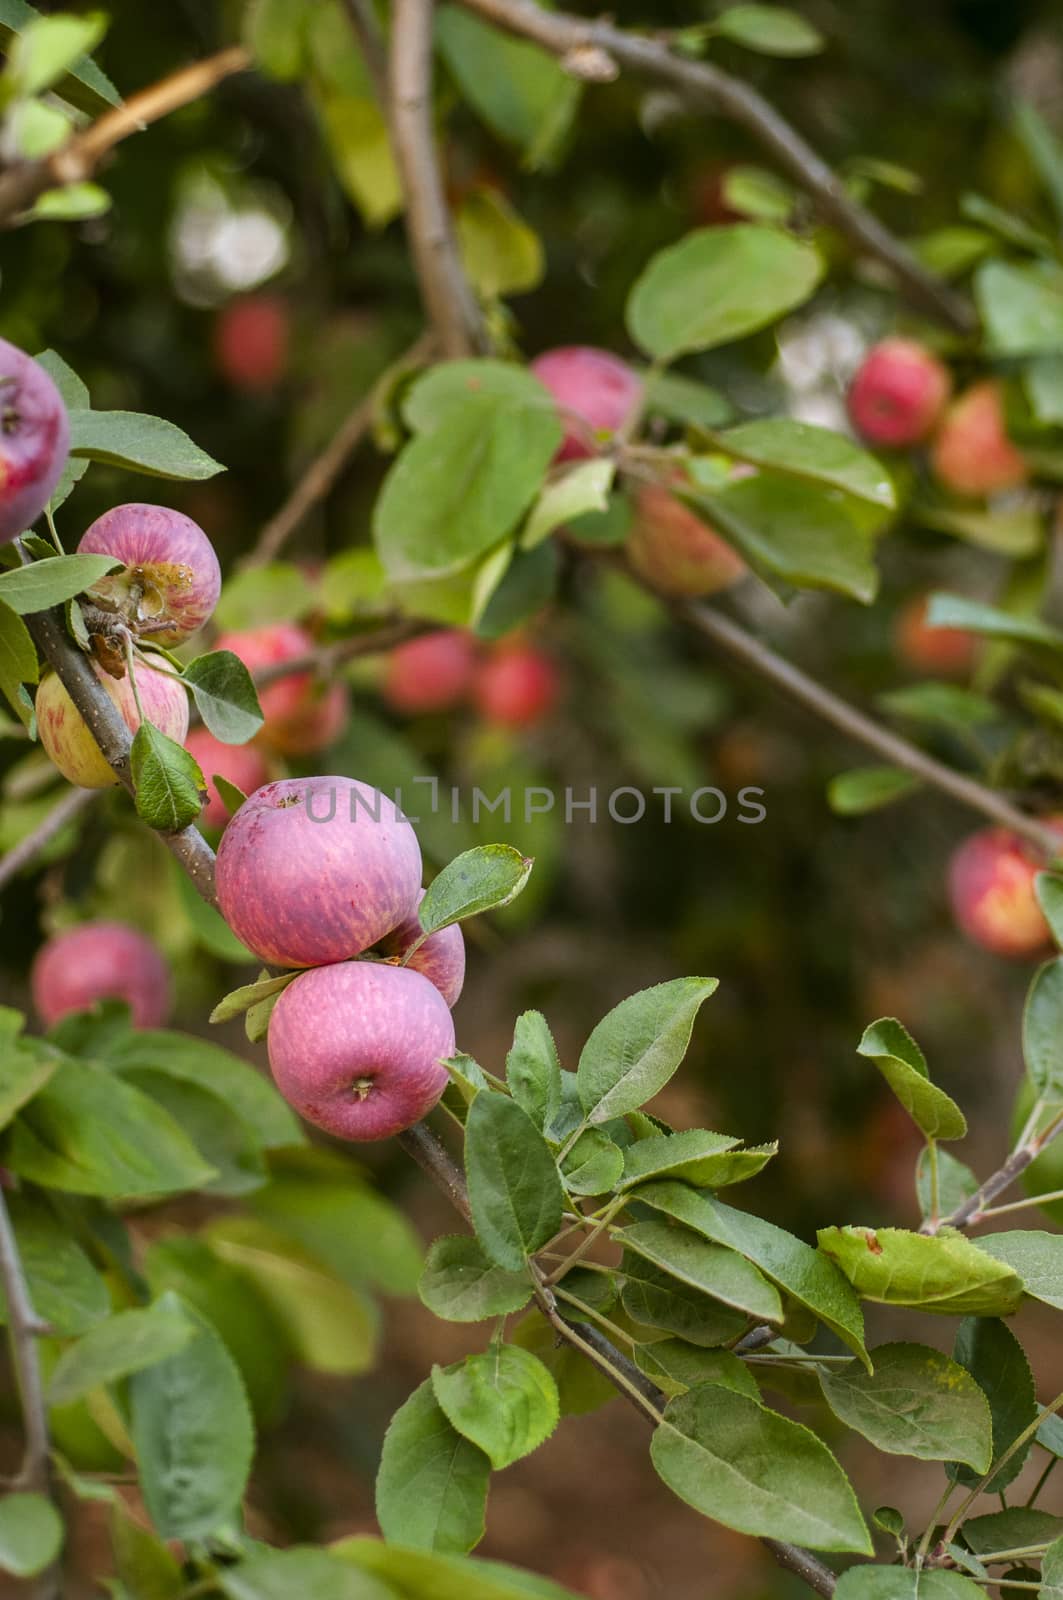 Ripe red apples on tree by Njean